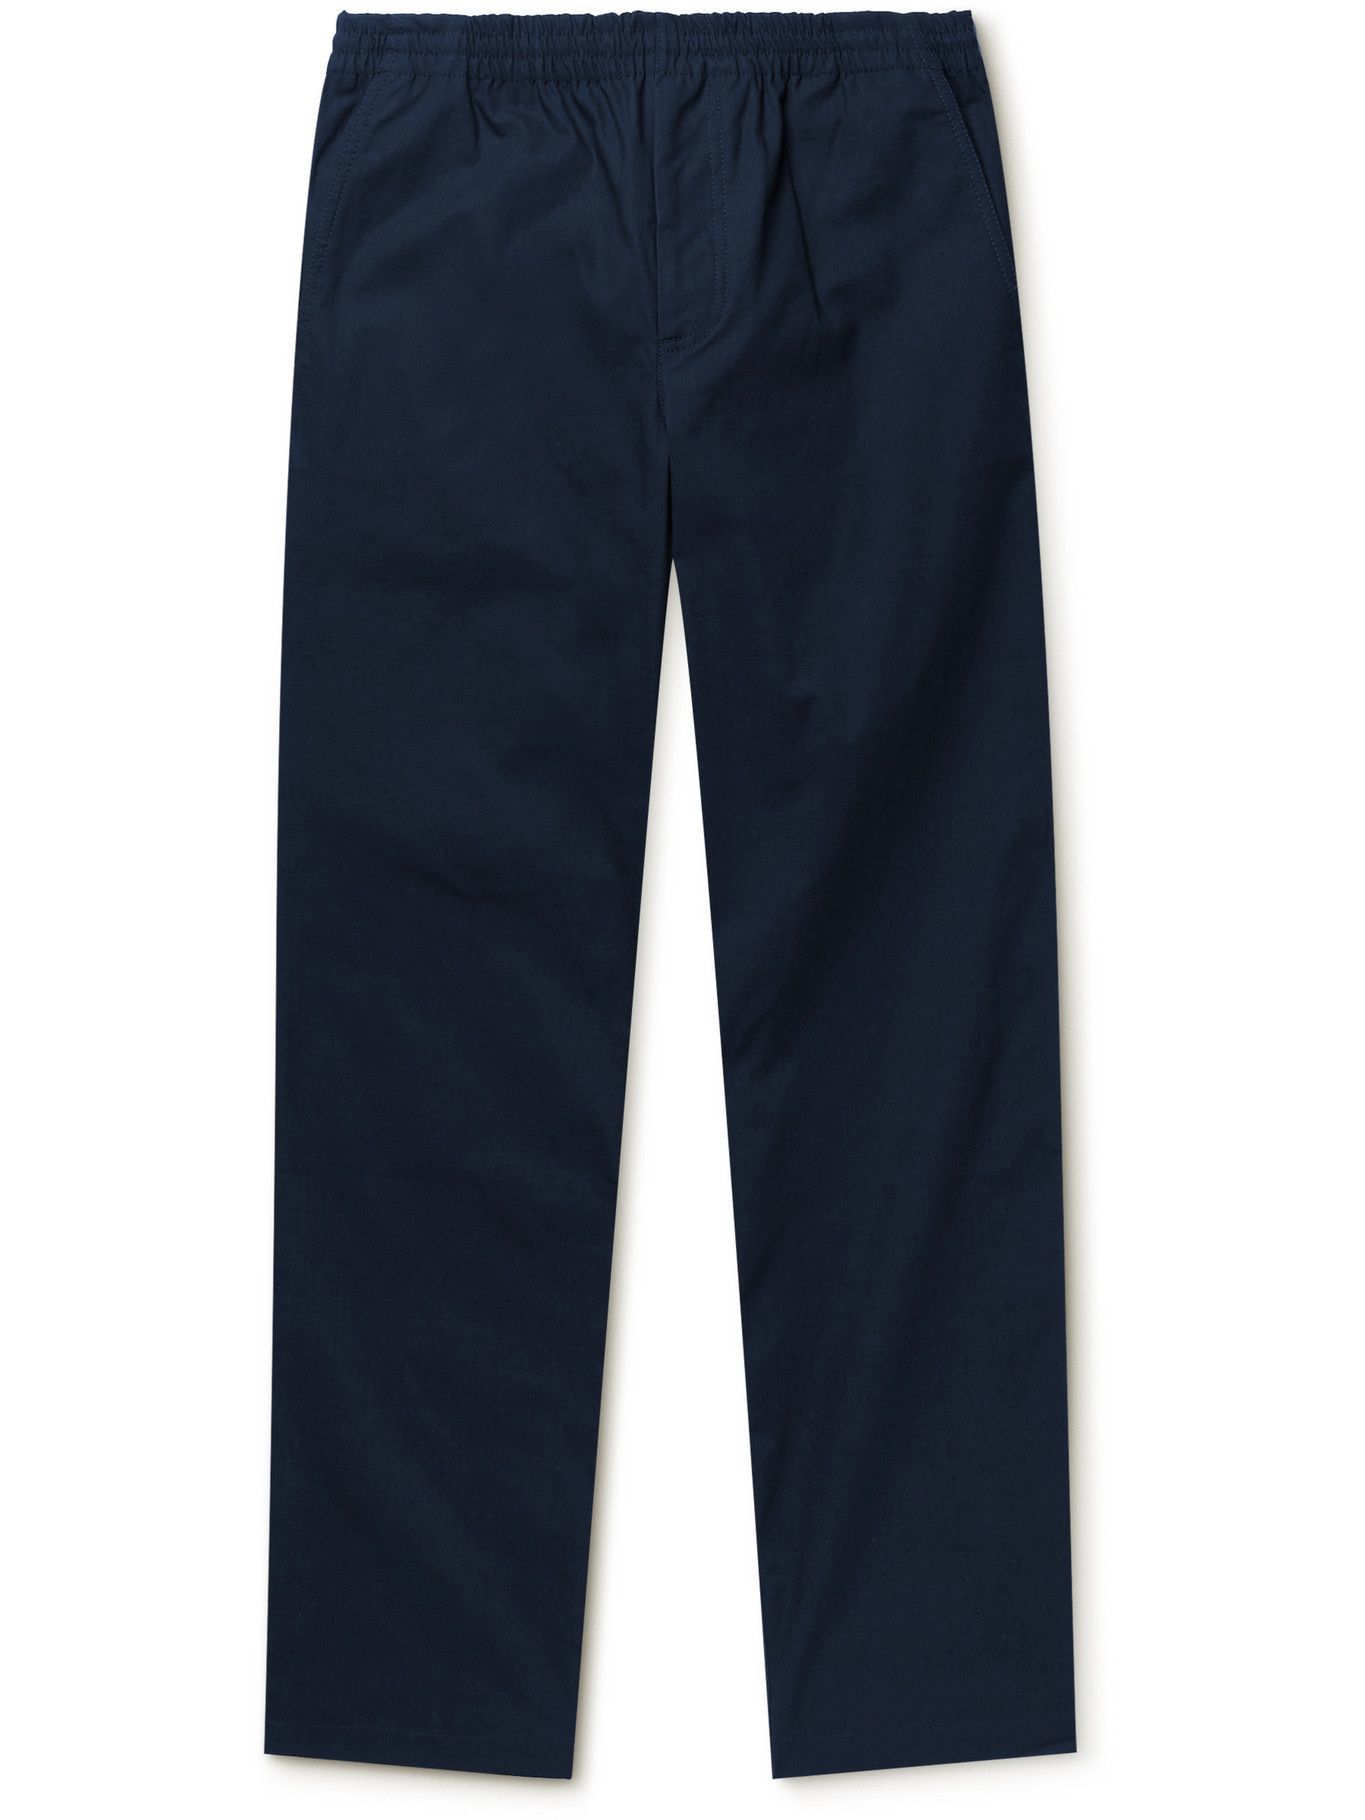 NORSE PROJECTS - Evald Cotton-Blend Ripstop Trousers - Blue Norse Projects